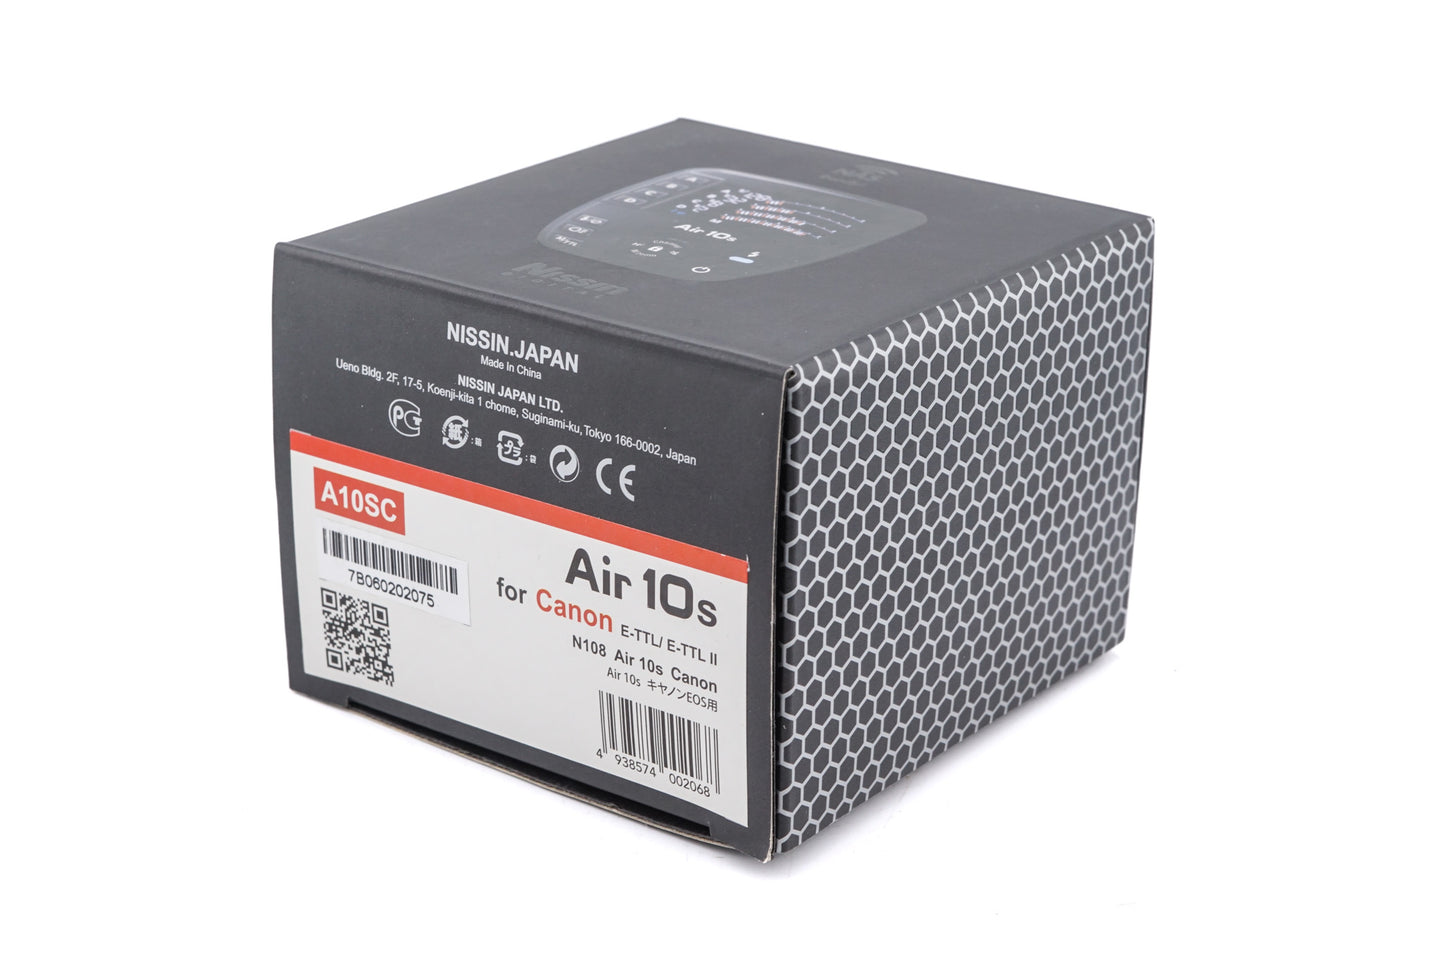 Nissin Air 10s